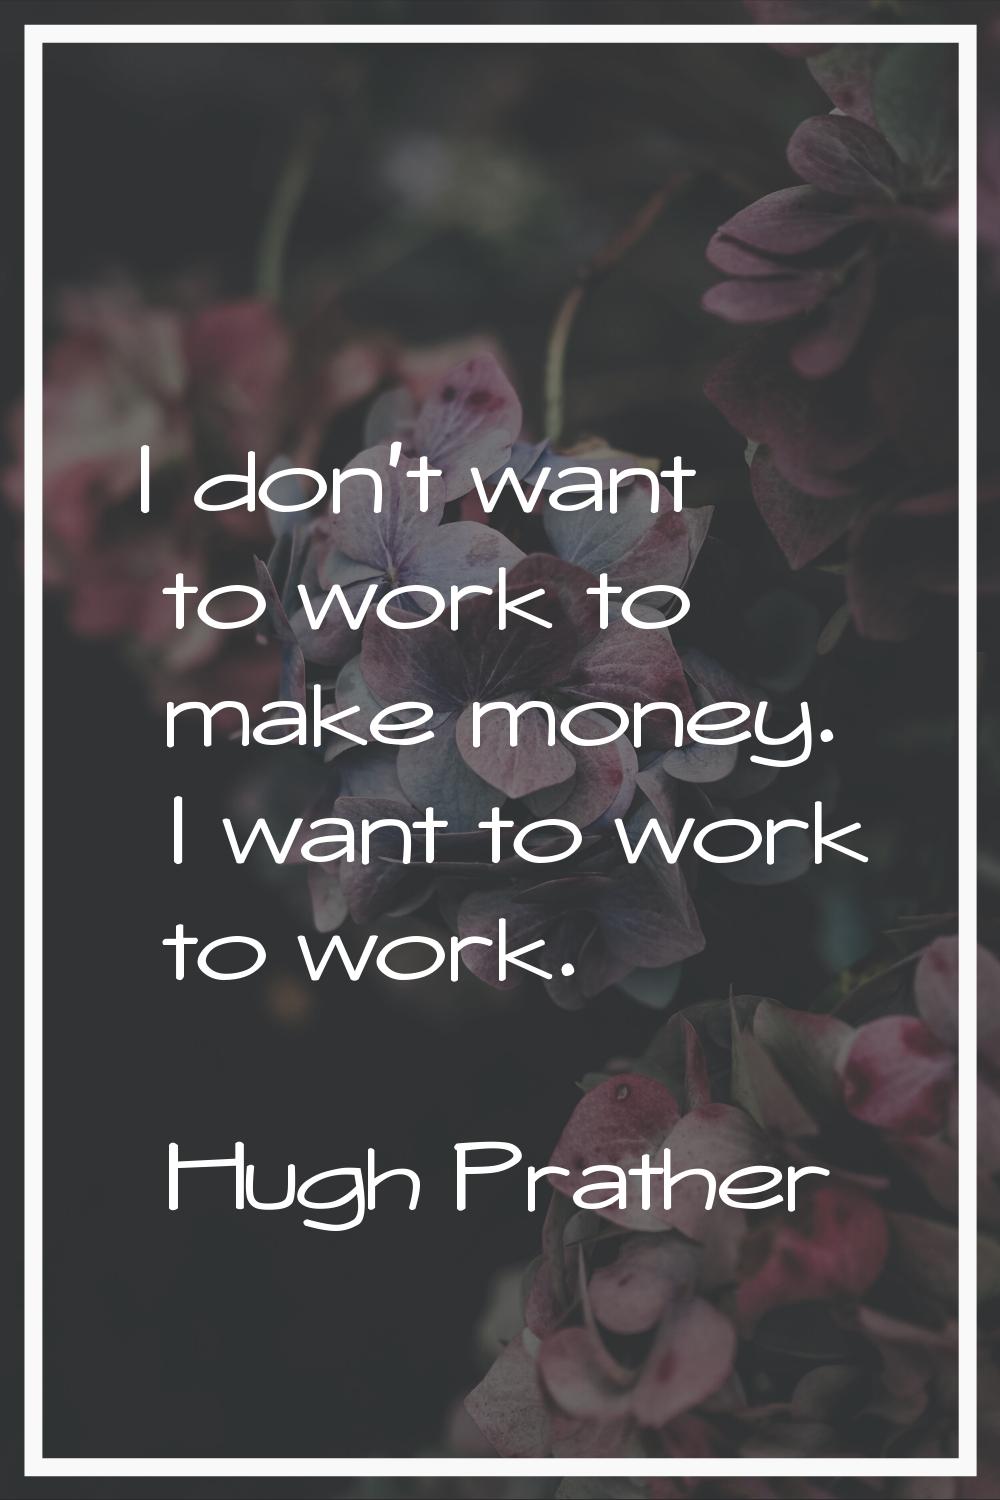 I don't want to work to make money. I want to work to work.